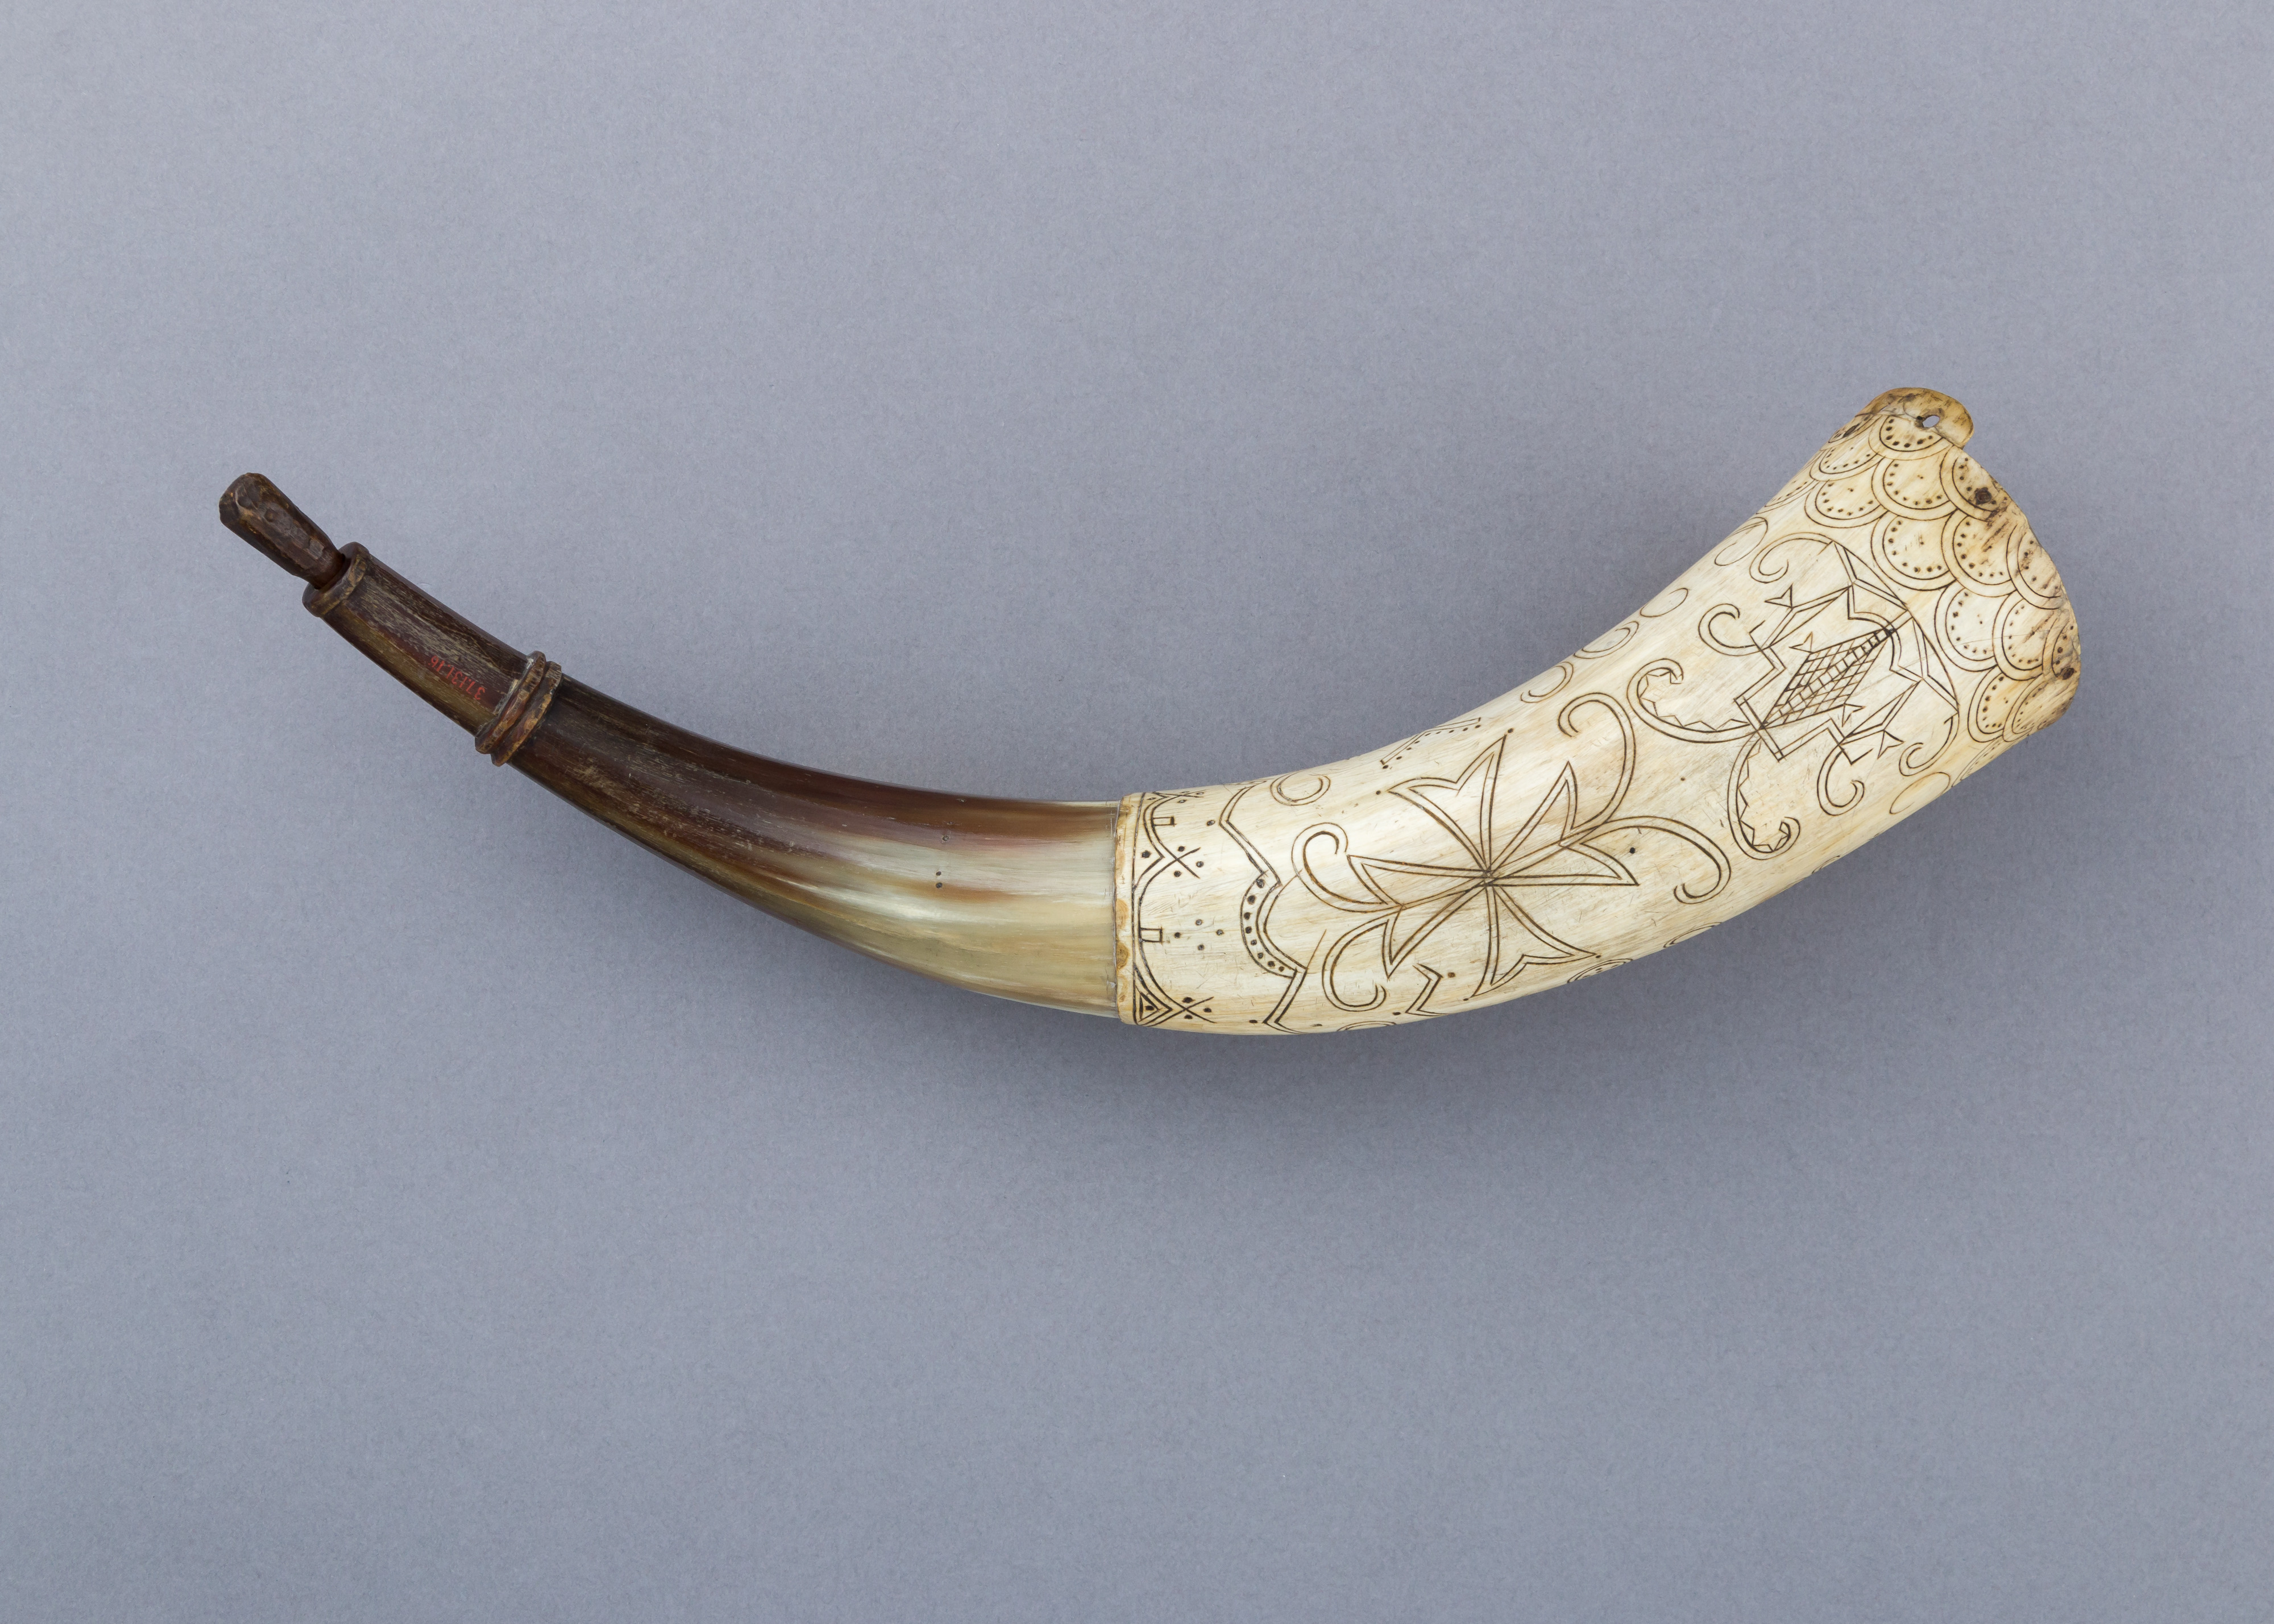 Powder horn  National Museum of the American Indian